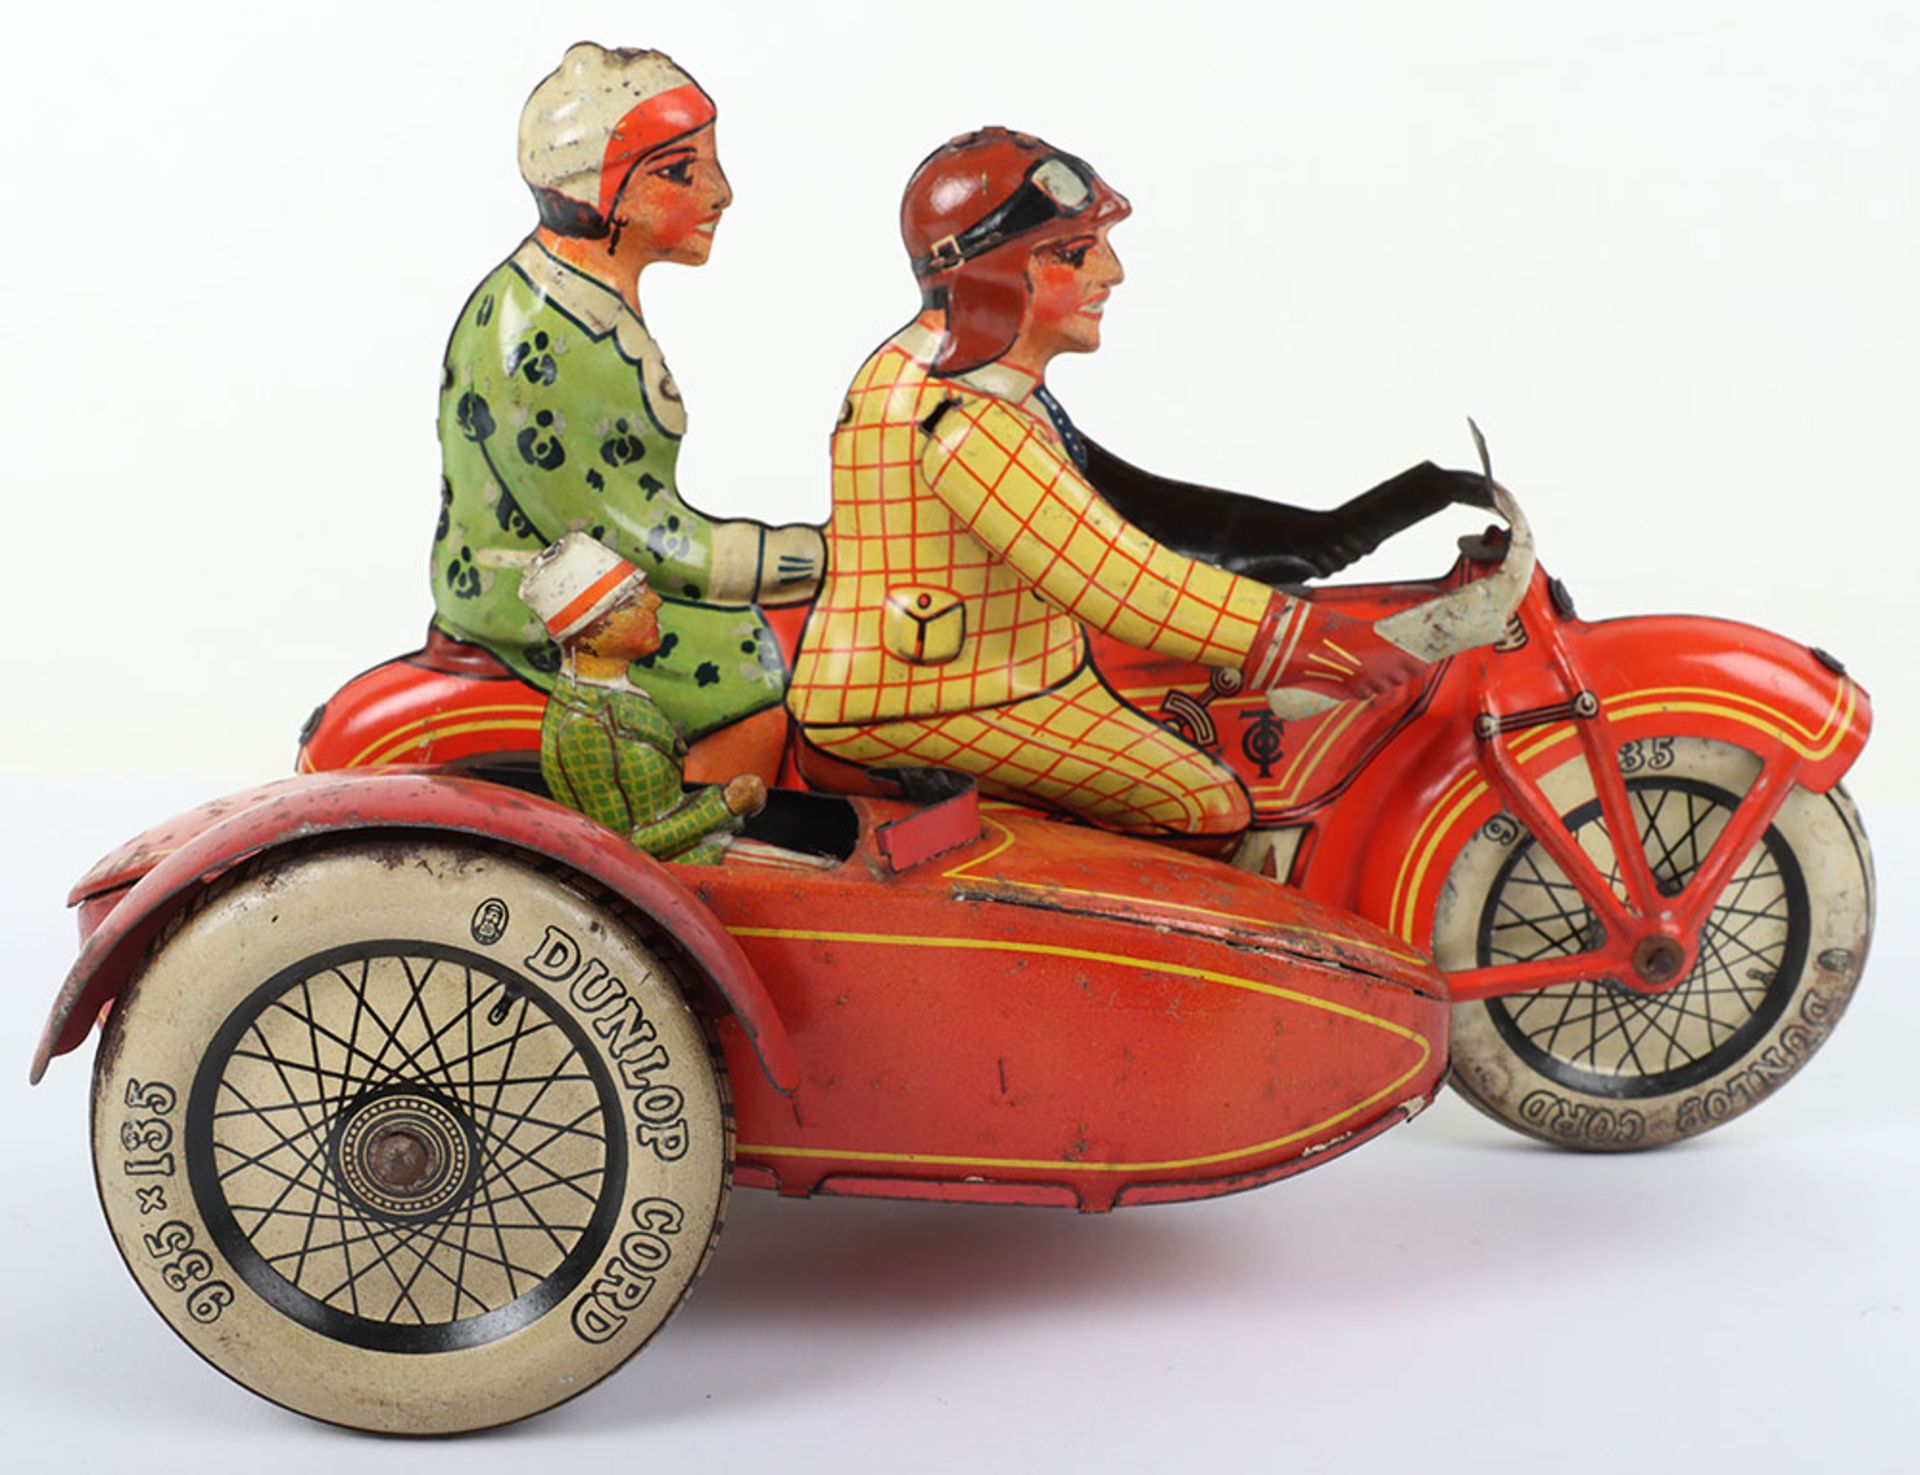 Large and rare Tipp & Co clockwork Motorbike with sidecar, German 1926 - Image 2 of 6